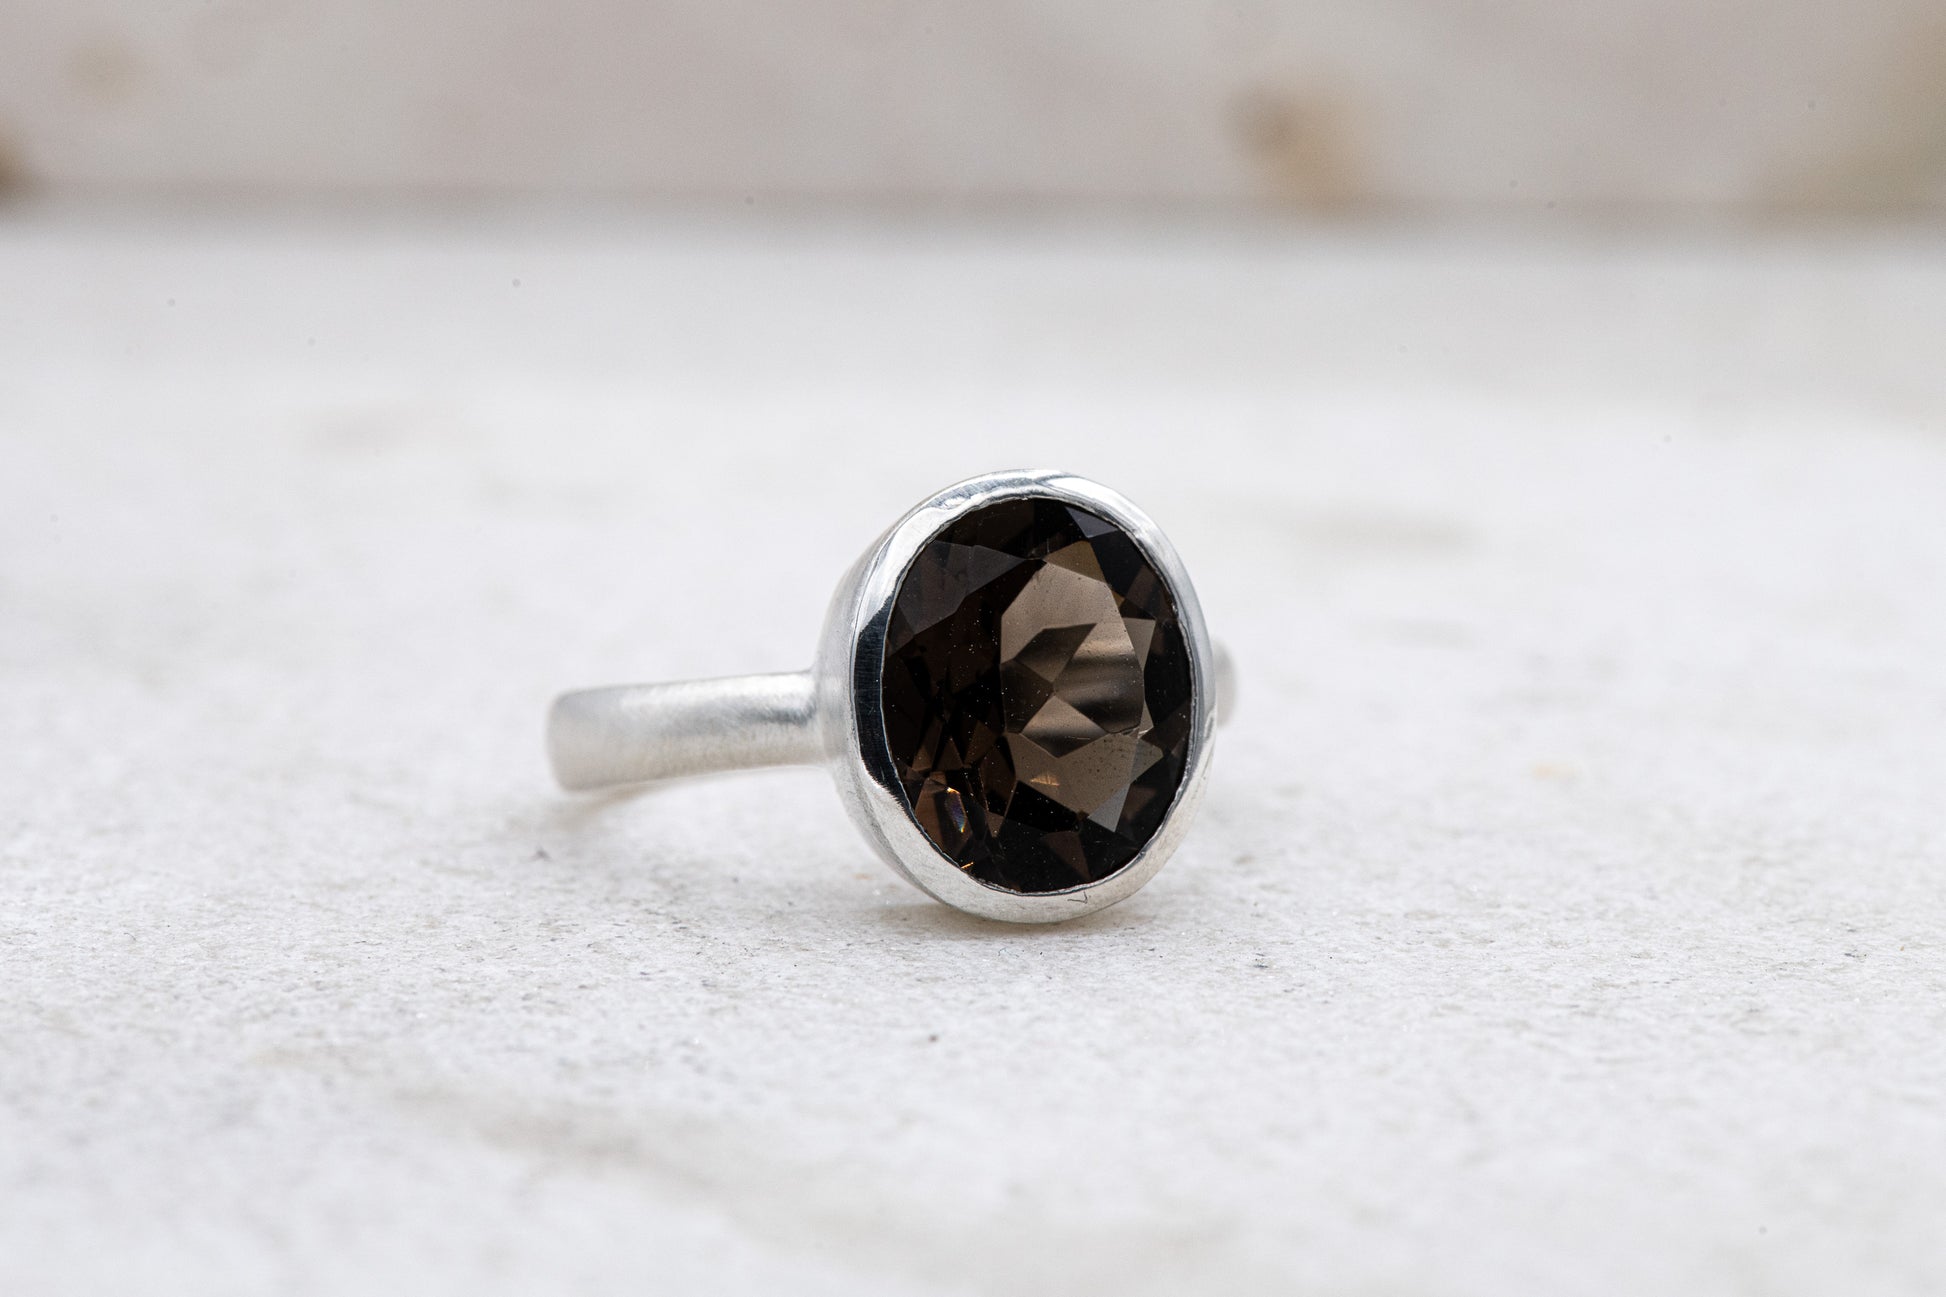 A handmade Solitaire Smoky Quartz Ring with a dark brown stone by Cassin Jewelry.